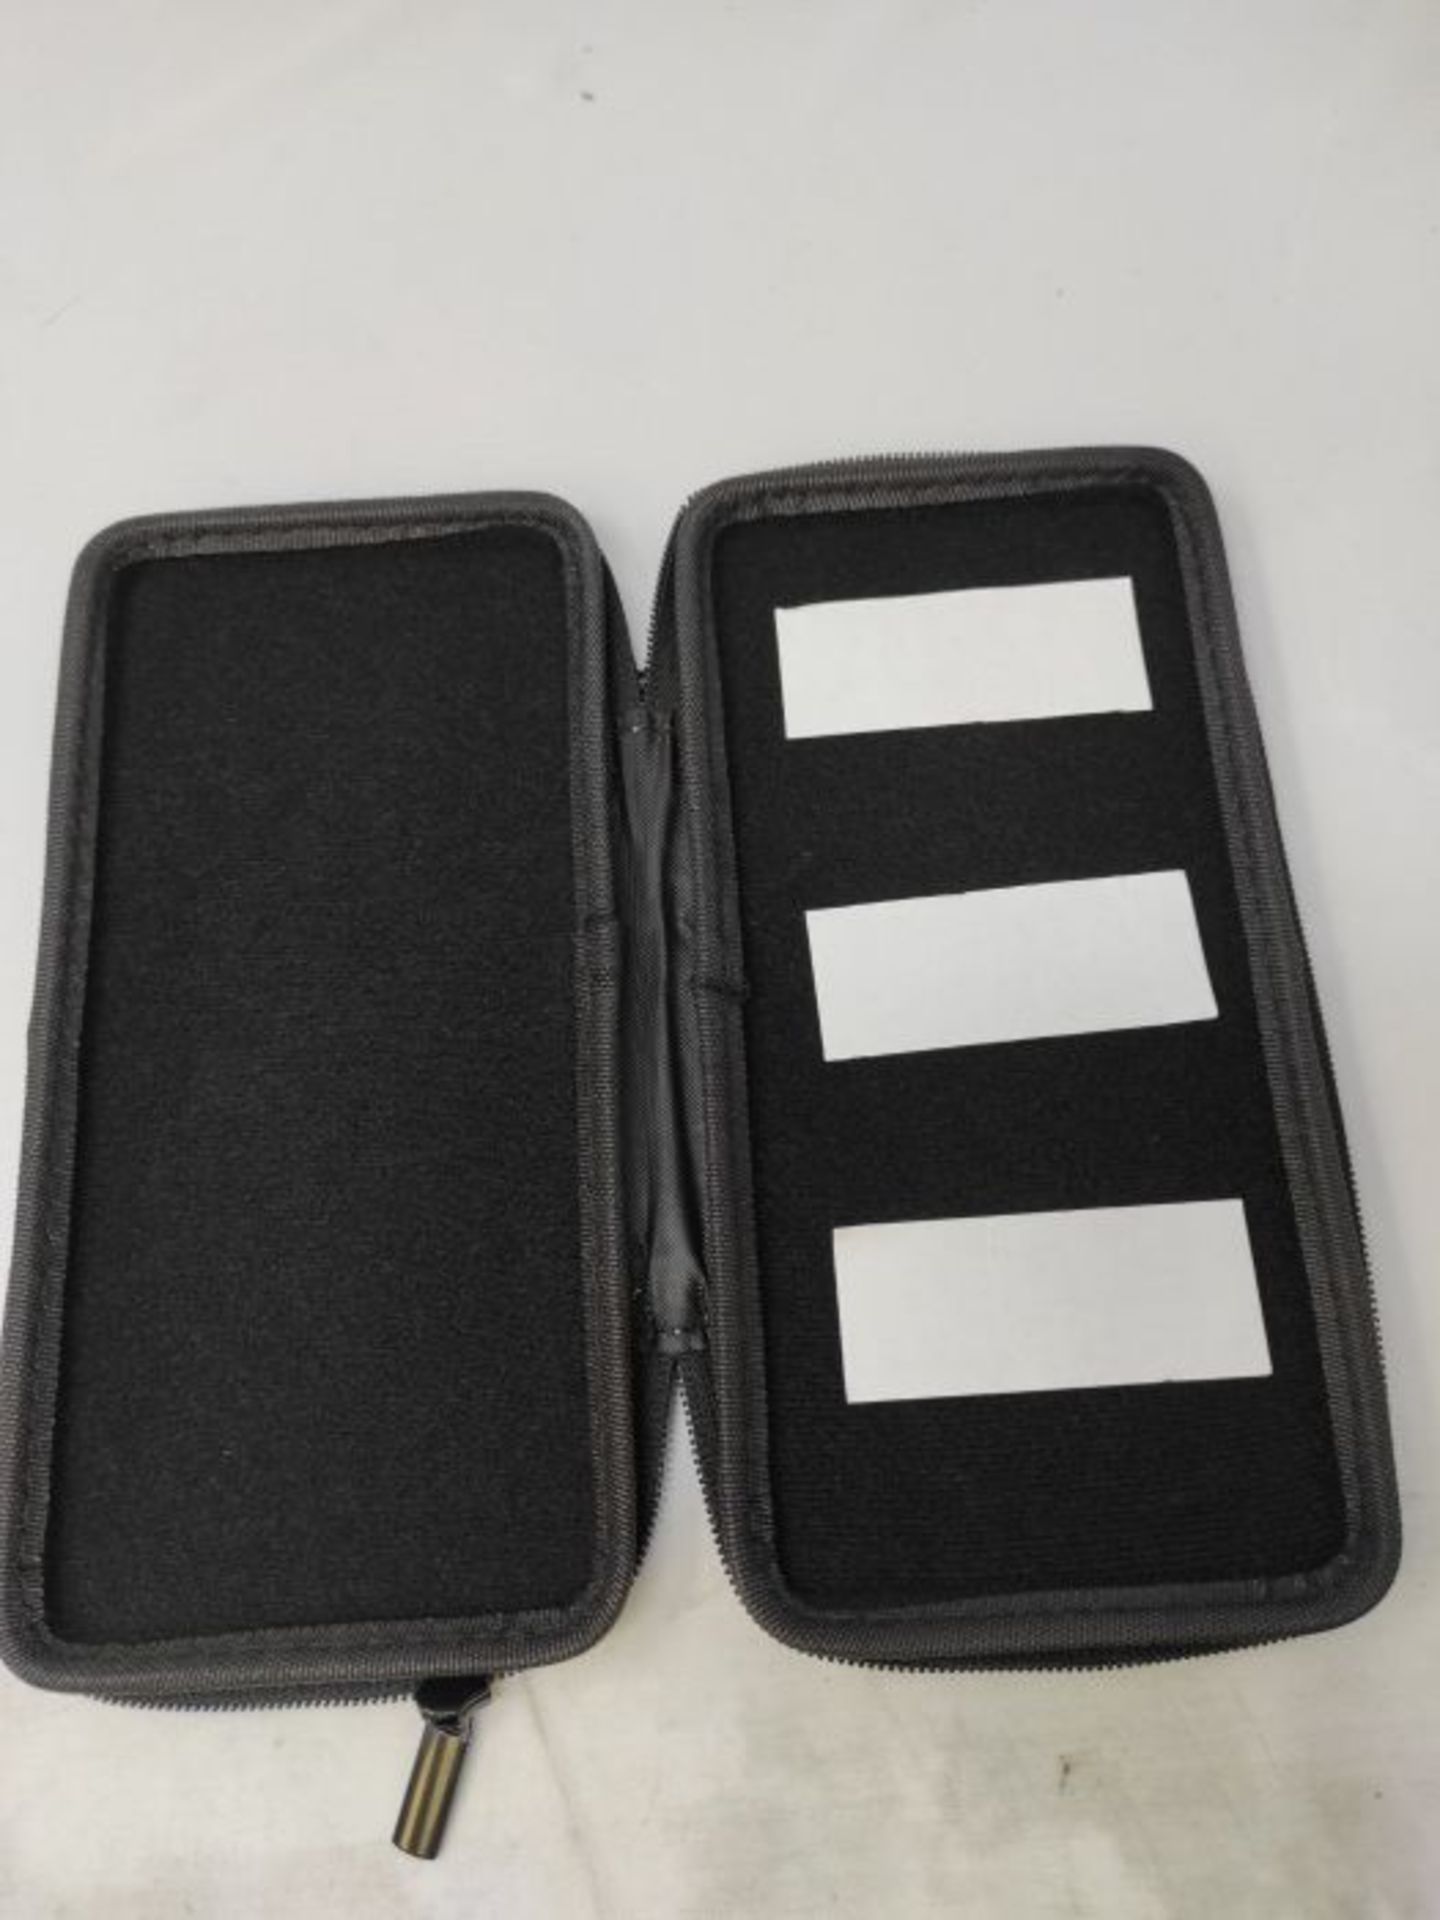 Protective case compatible with TI 84 Plus CE-T light grey - Image 3 of 3